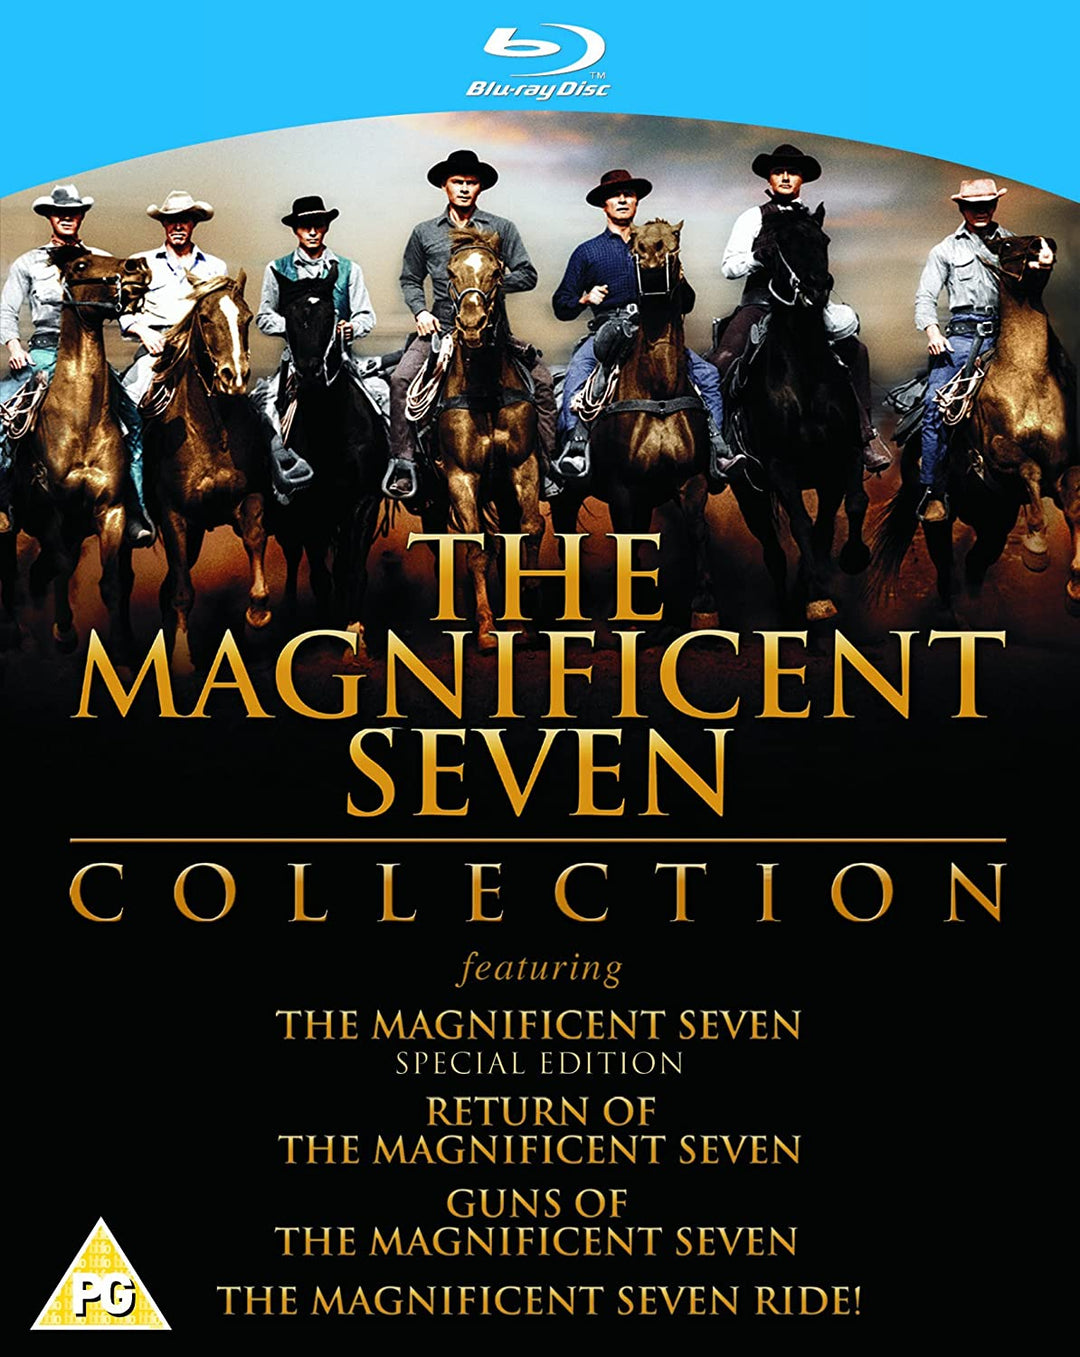 The Magnificent Seven Collection [Blu-ray] [1960] [Region Free]